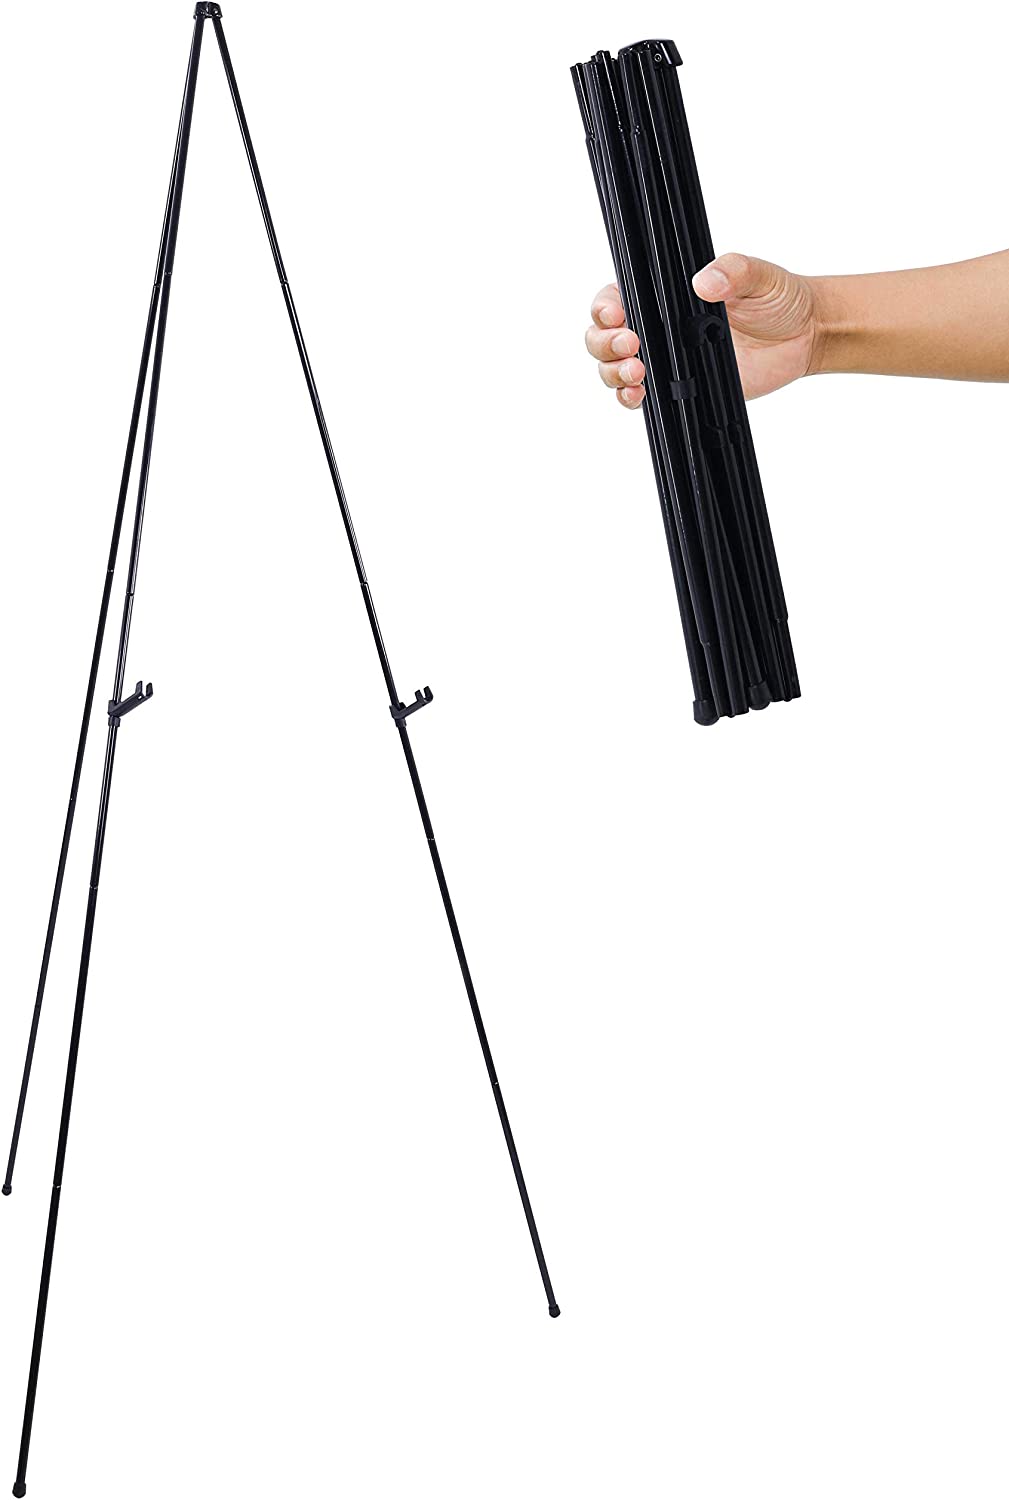 U.S. Art Supply 63″ High Steel Easy Folding Display Easel (Pack of 6 Easels) – Instantly Collapses, Adjustable Height Display Holders – Portable Tripod Stand, Presentations, Signs Posters, Holds 5 lbs